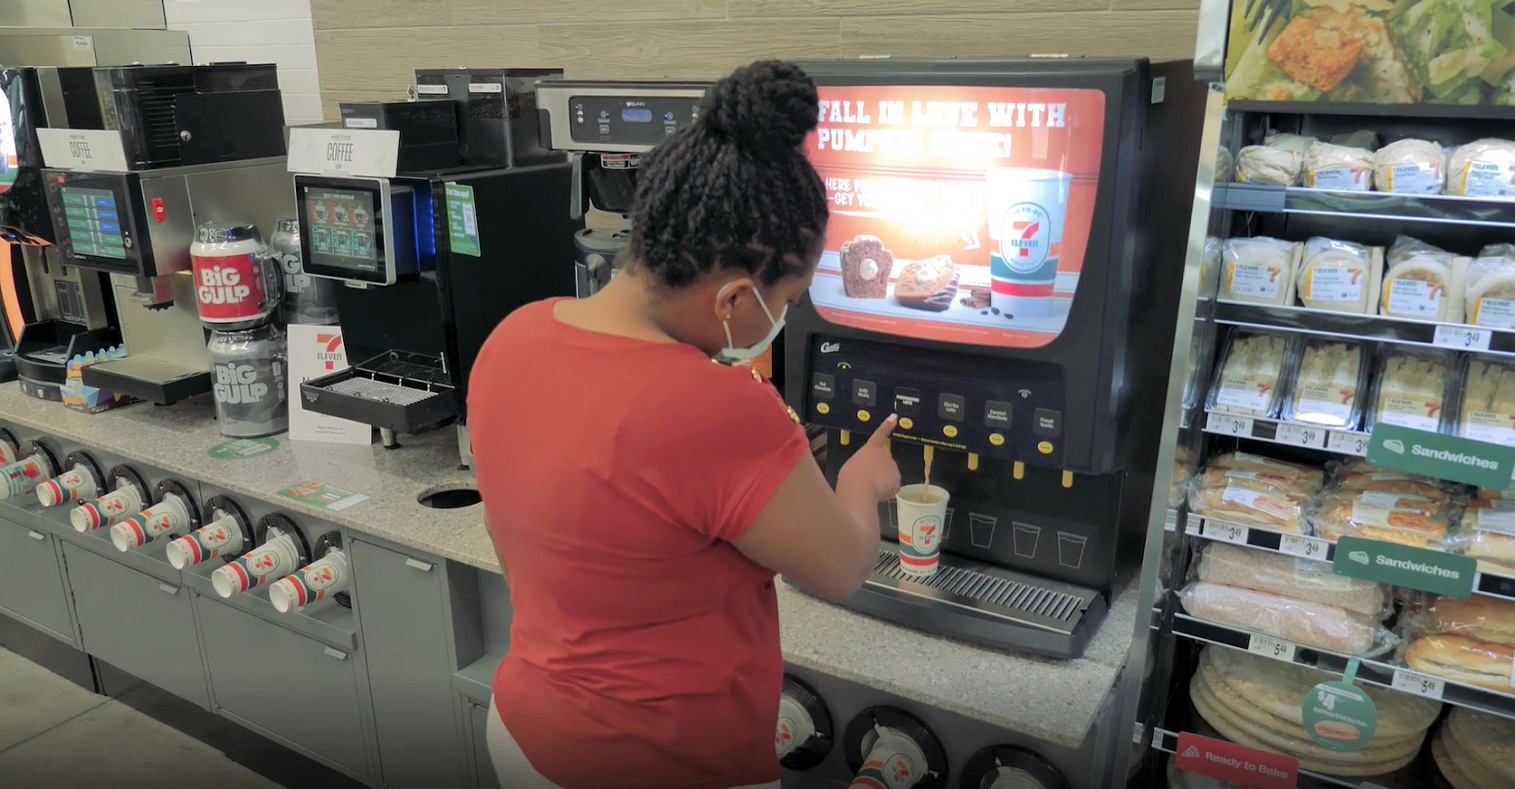 Woman Pouring a Beverage at a c-store self-service station and wrapped sandwiches nearby